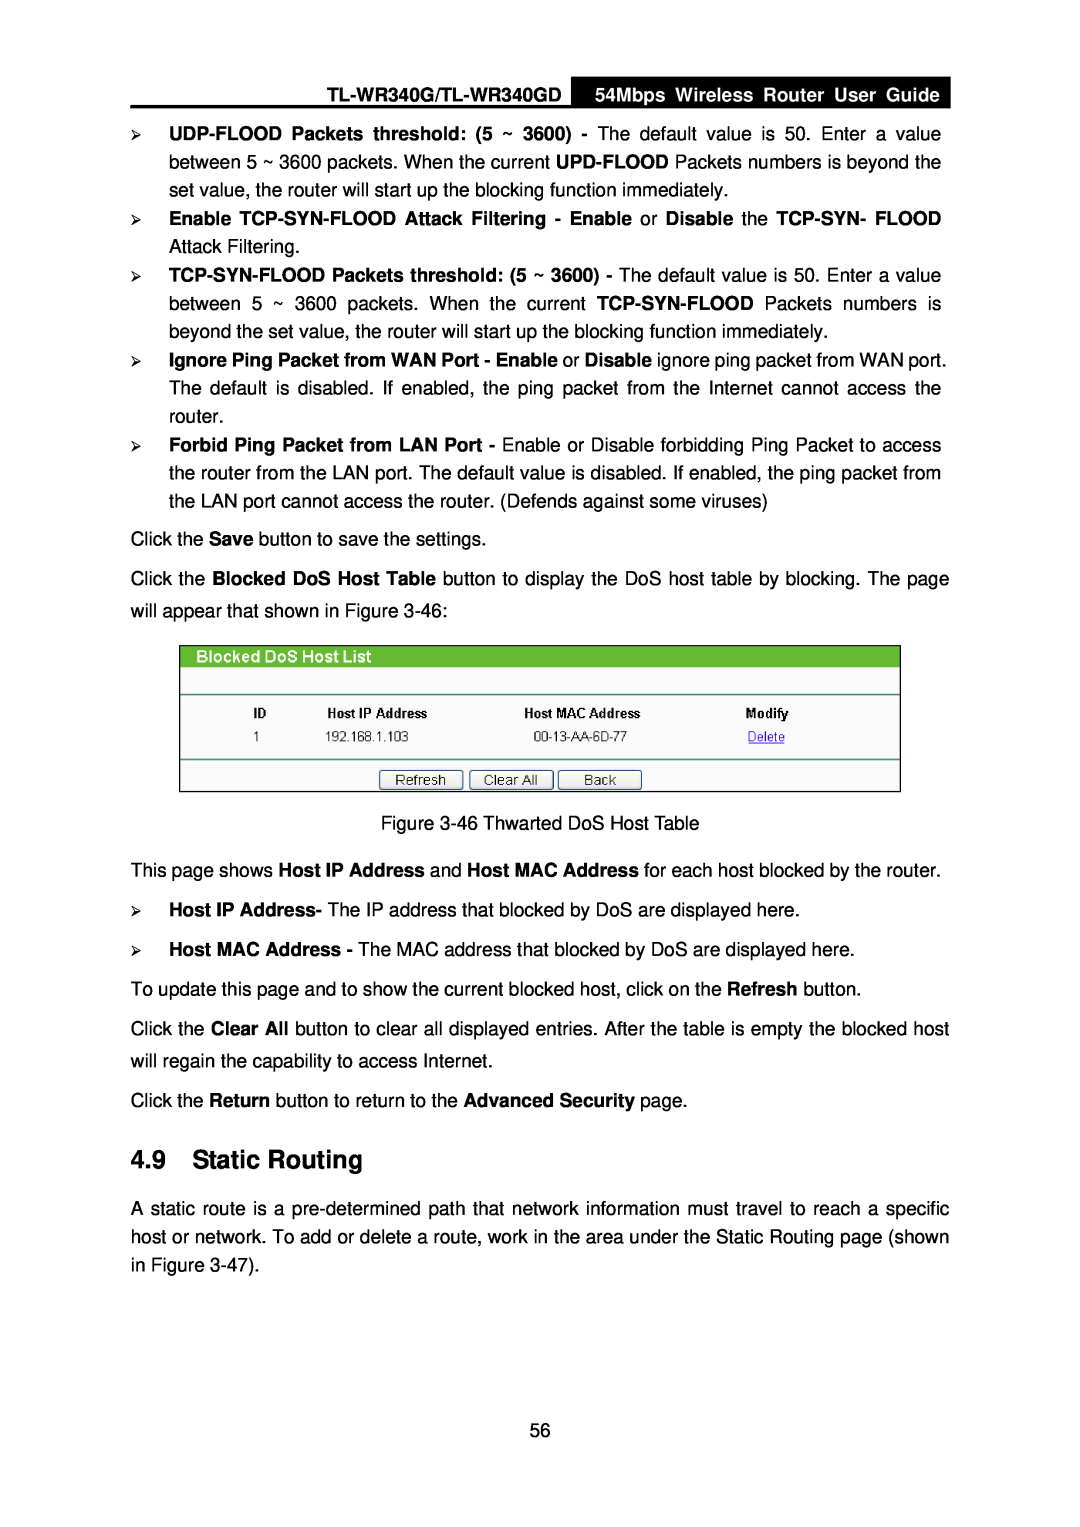 TP-Link manual Static Routing, TL-WR340G/TL-WR340GD, 54Mbps Wireless Router User Guide 